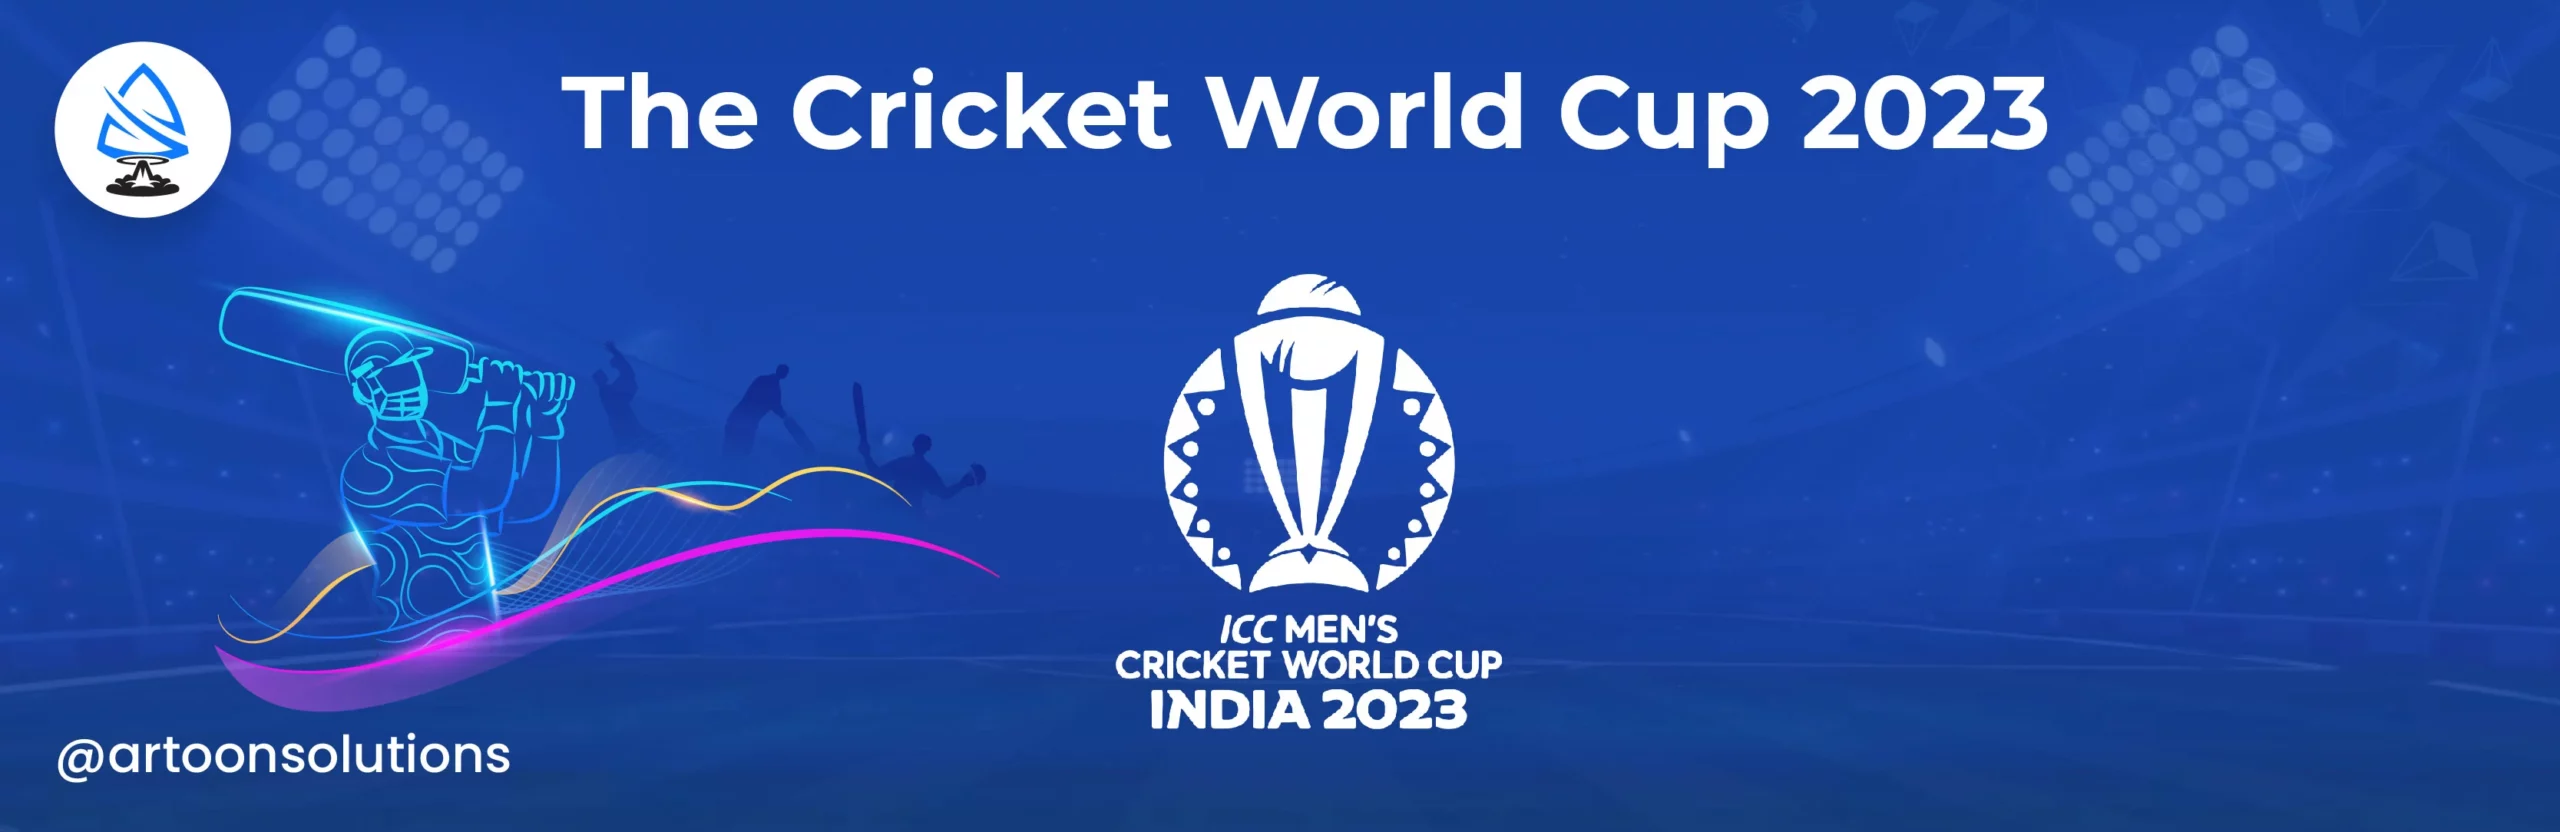 The Cricket World Cup 2023